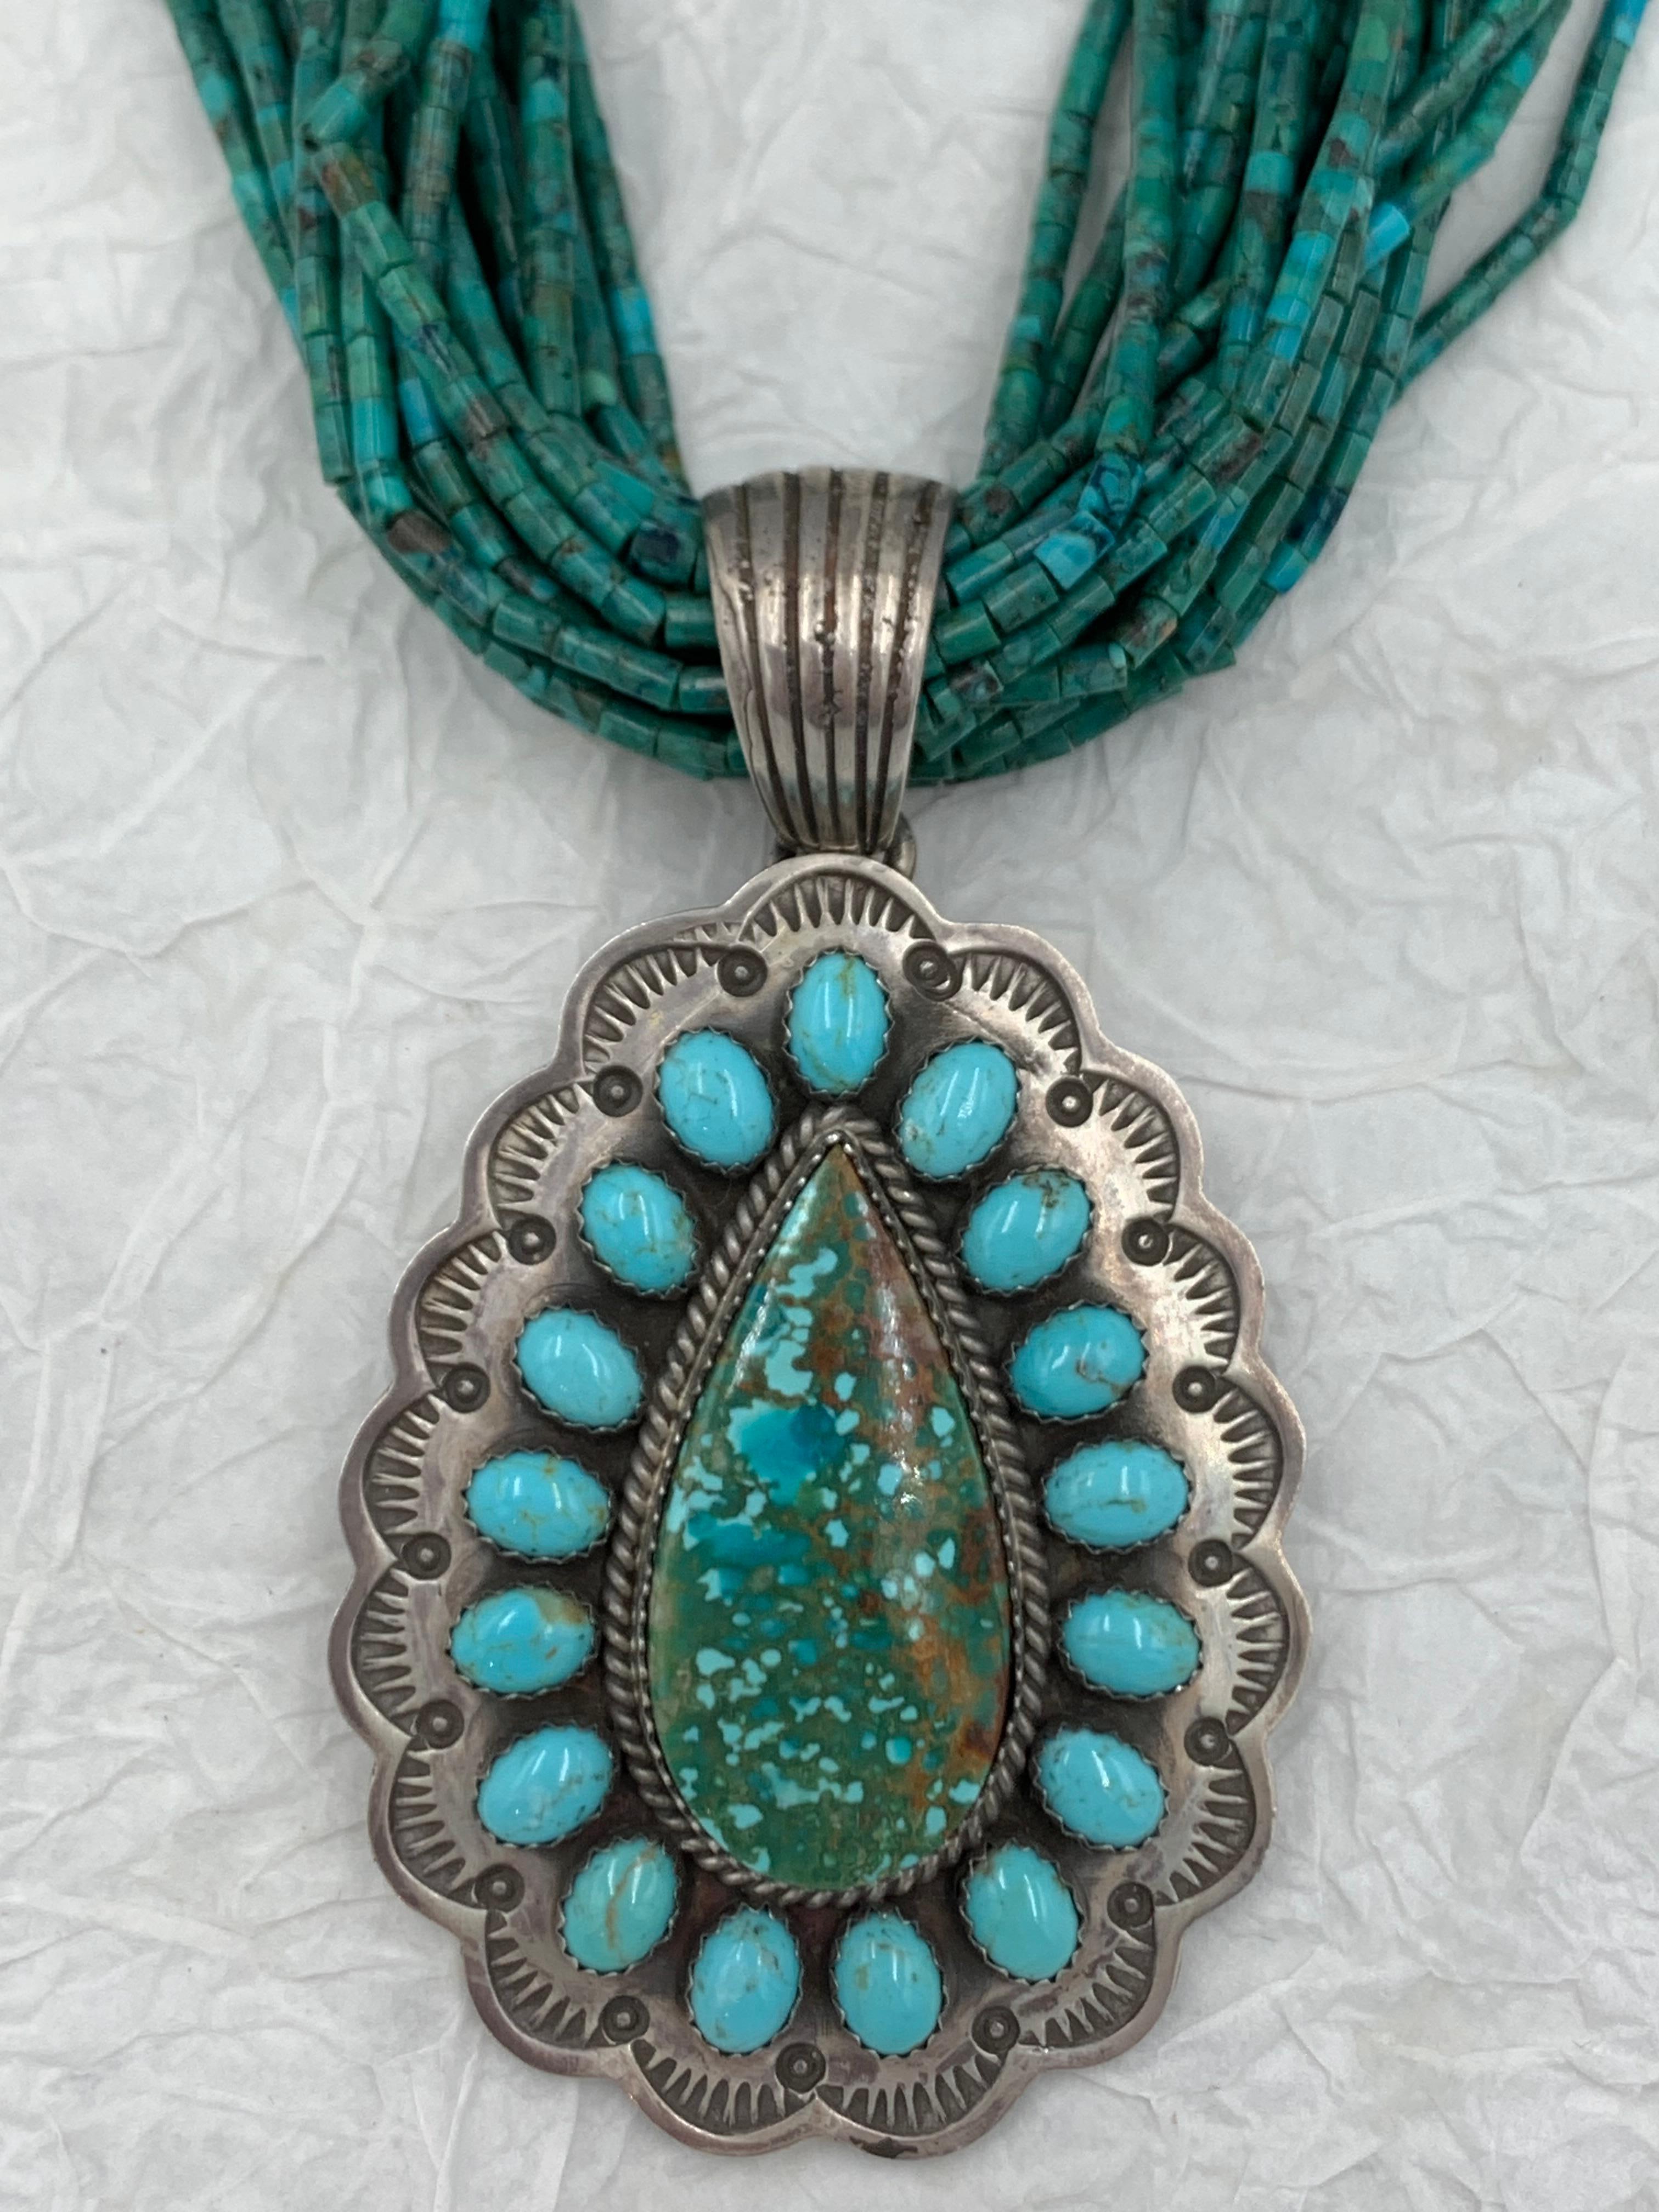 Sterling silver old style pendant by Navajo silversmith Leonard James. A pear-shaped turquoise stone in the center is surrounded by 17 smaller turquoise cabochons. The sterling silver pendant is 1 7/8” x 2 1/2” and signed “L James S/S.”

Twenty two